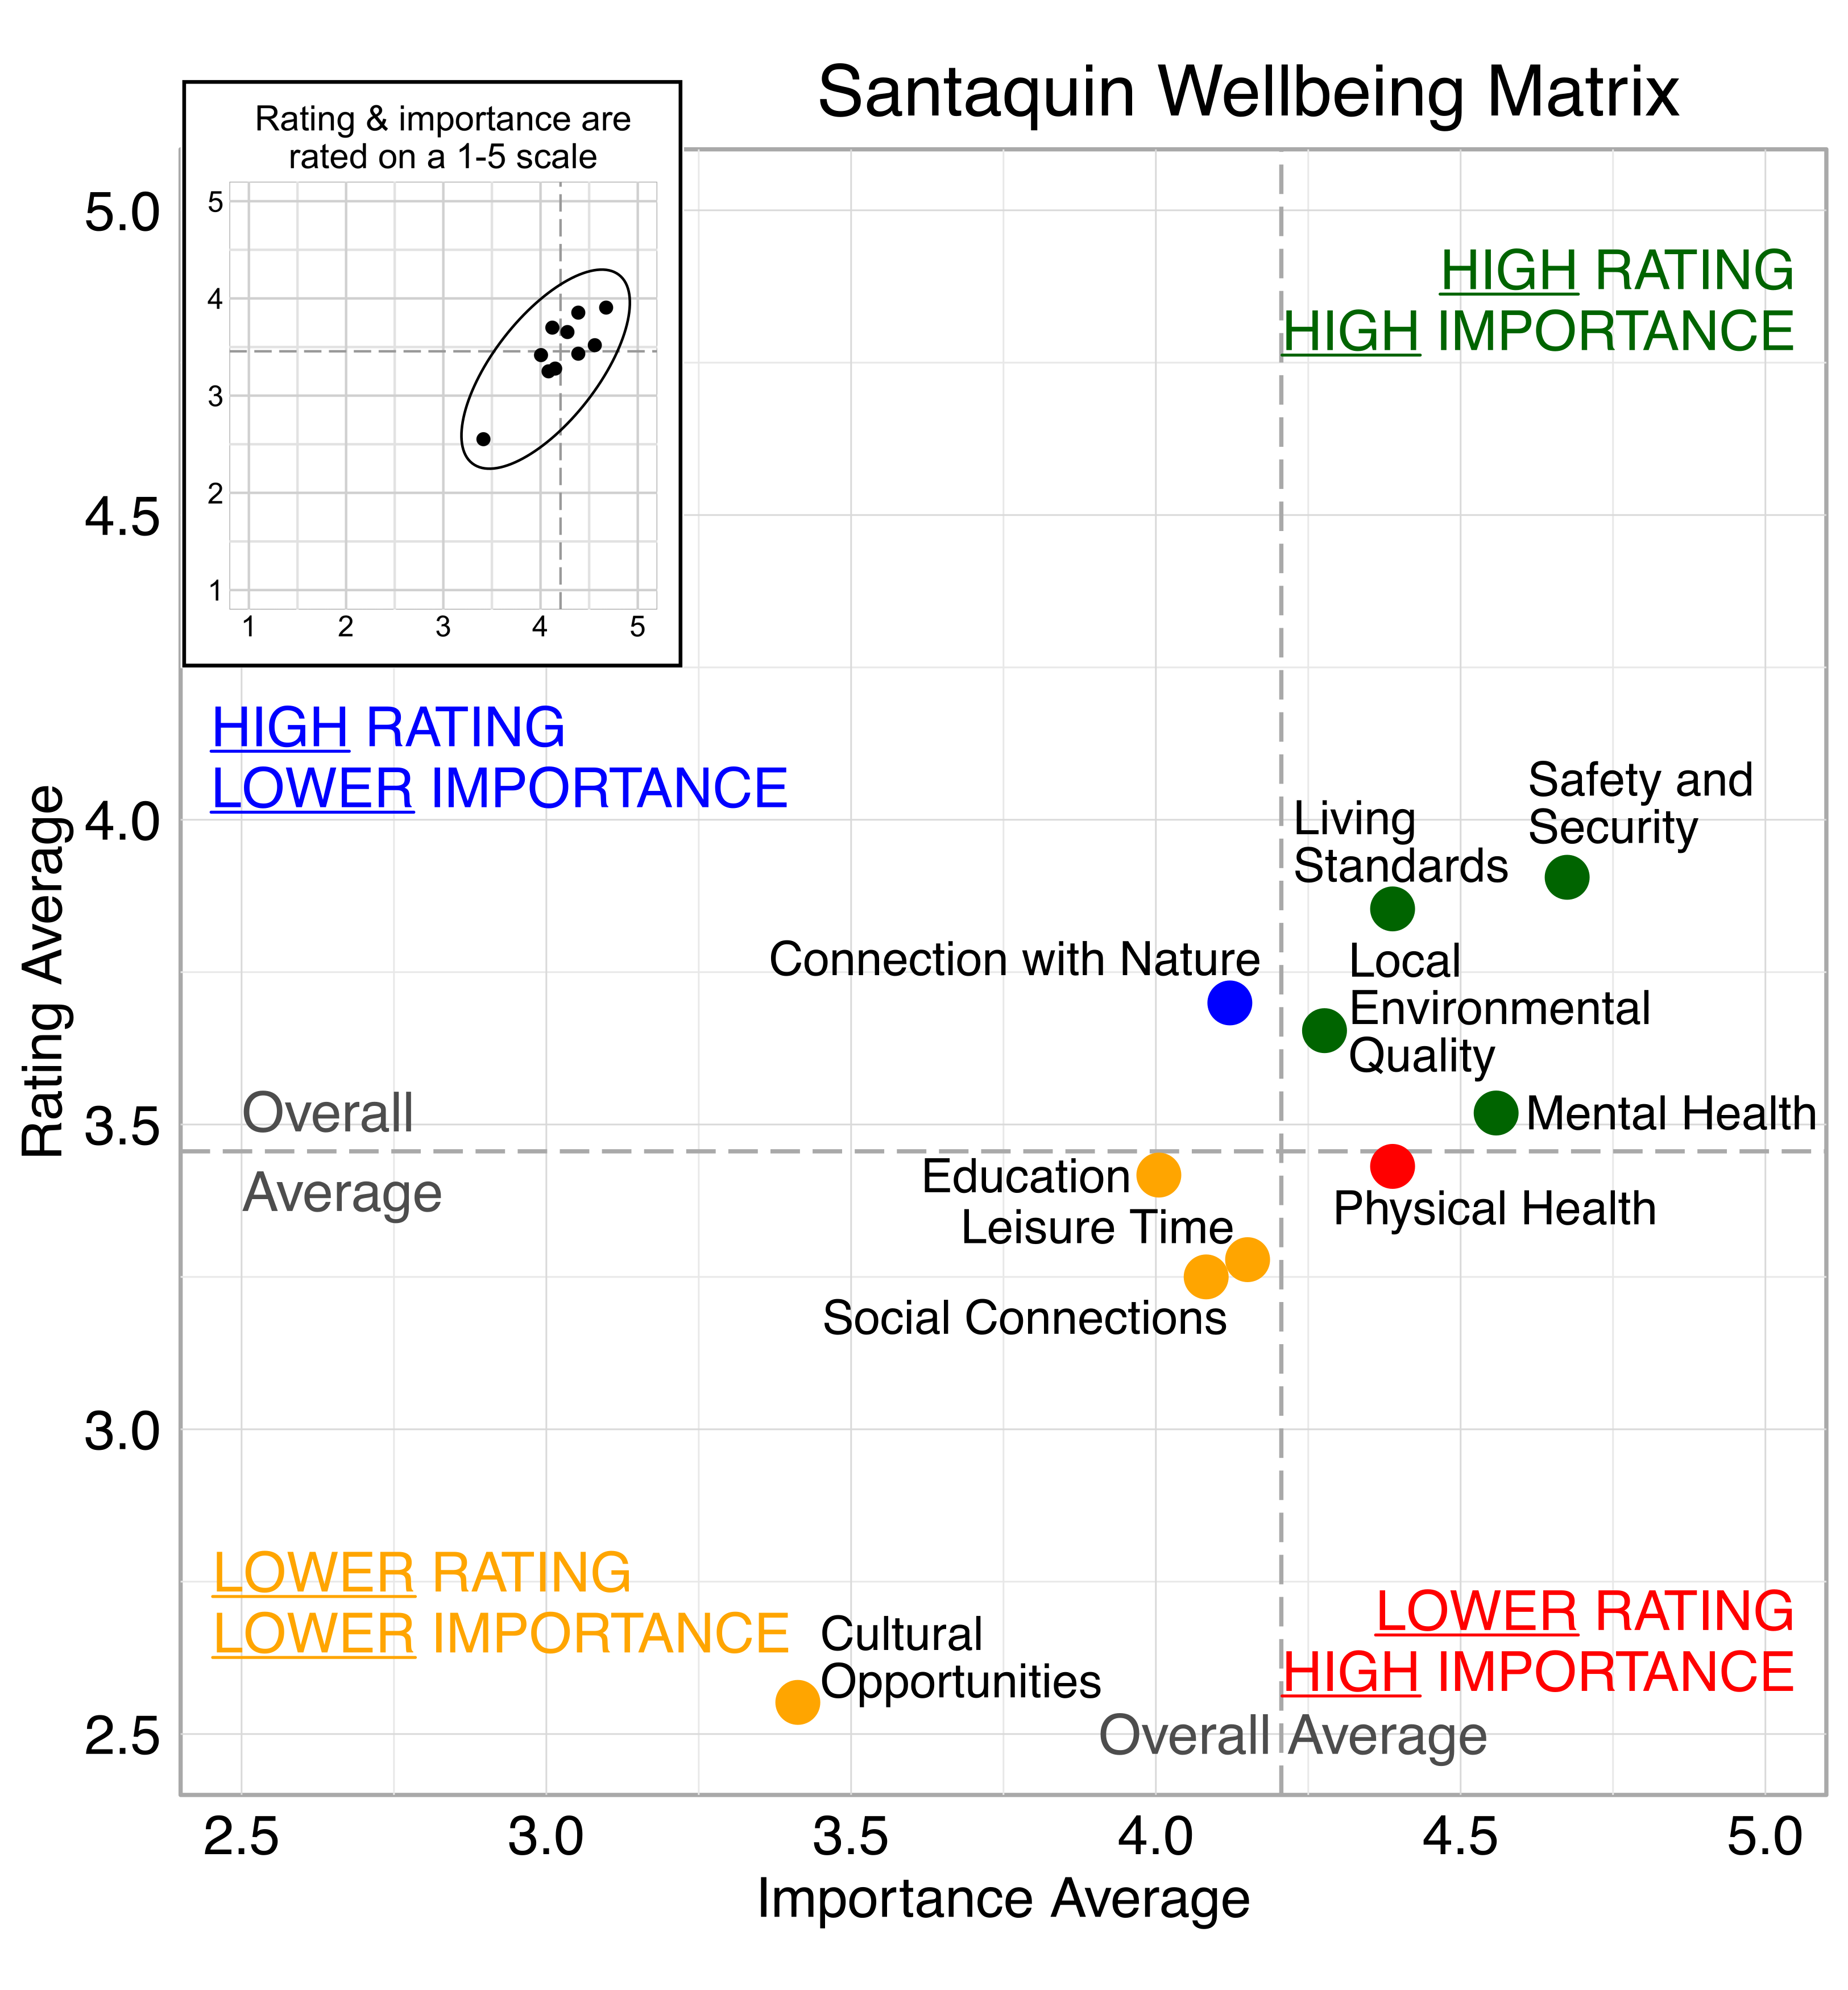 Scatterplot. Title: Santquin Wellbeing Matrix. Domains are classified into four quadrants depending on their average rating and average importance as compared to the average of all the average domain ratings and the average of all the average domain importance ratings. High rating, high importance (green quadrant) domains include: Safety and Security, Living Standards, Local Environmental Quality, Mental Health. lower Importance (blue quadrant) domains include: Connection with Nature. Lower rating, lower importance (yellow quadrant) domains include: Education, Leisure Time, Social connections, Cultural Opportunities. Lower rating, high importance (red quadrant) domains include: Physical Health. 